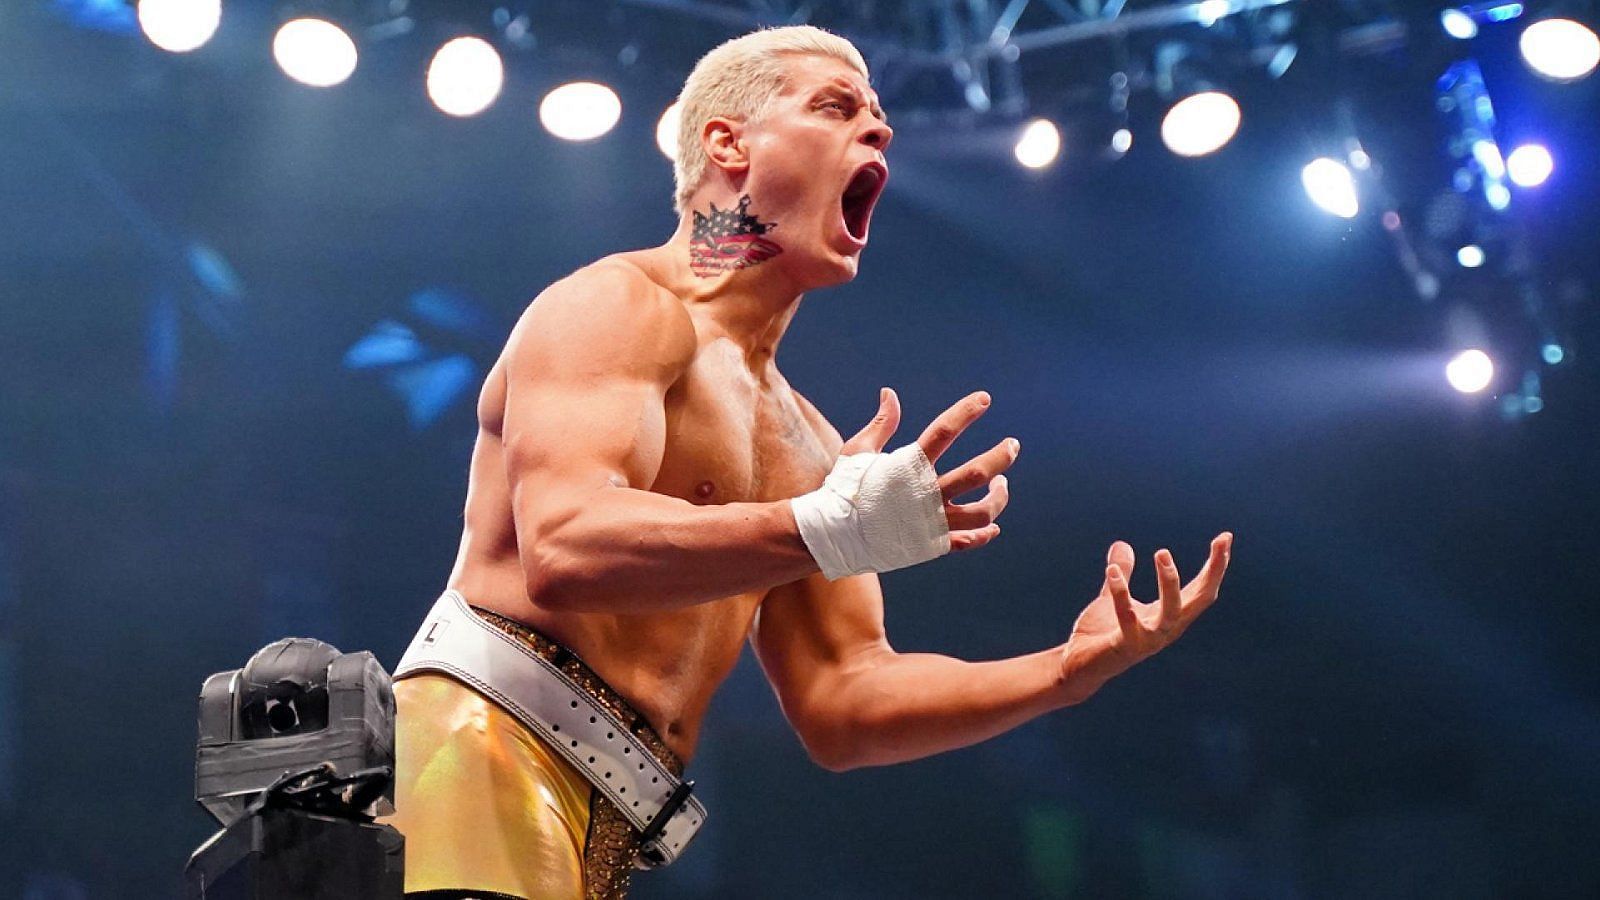 Cody Rhodes has reinvented himself into a next level superstar